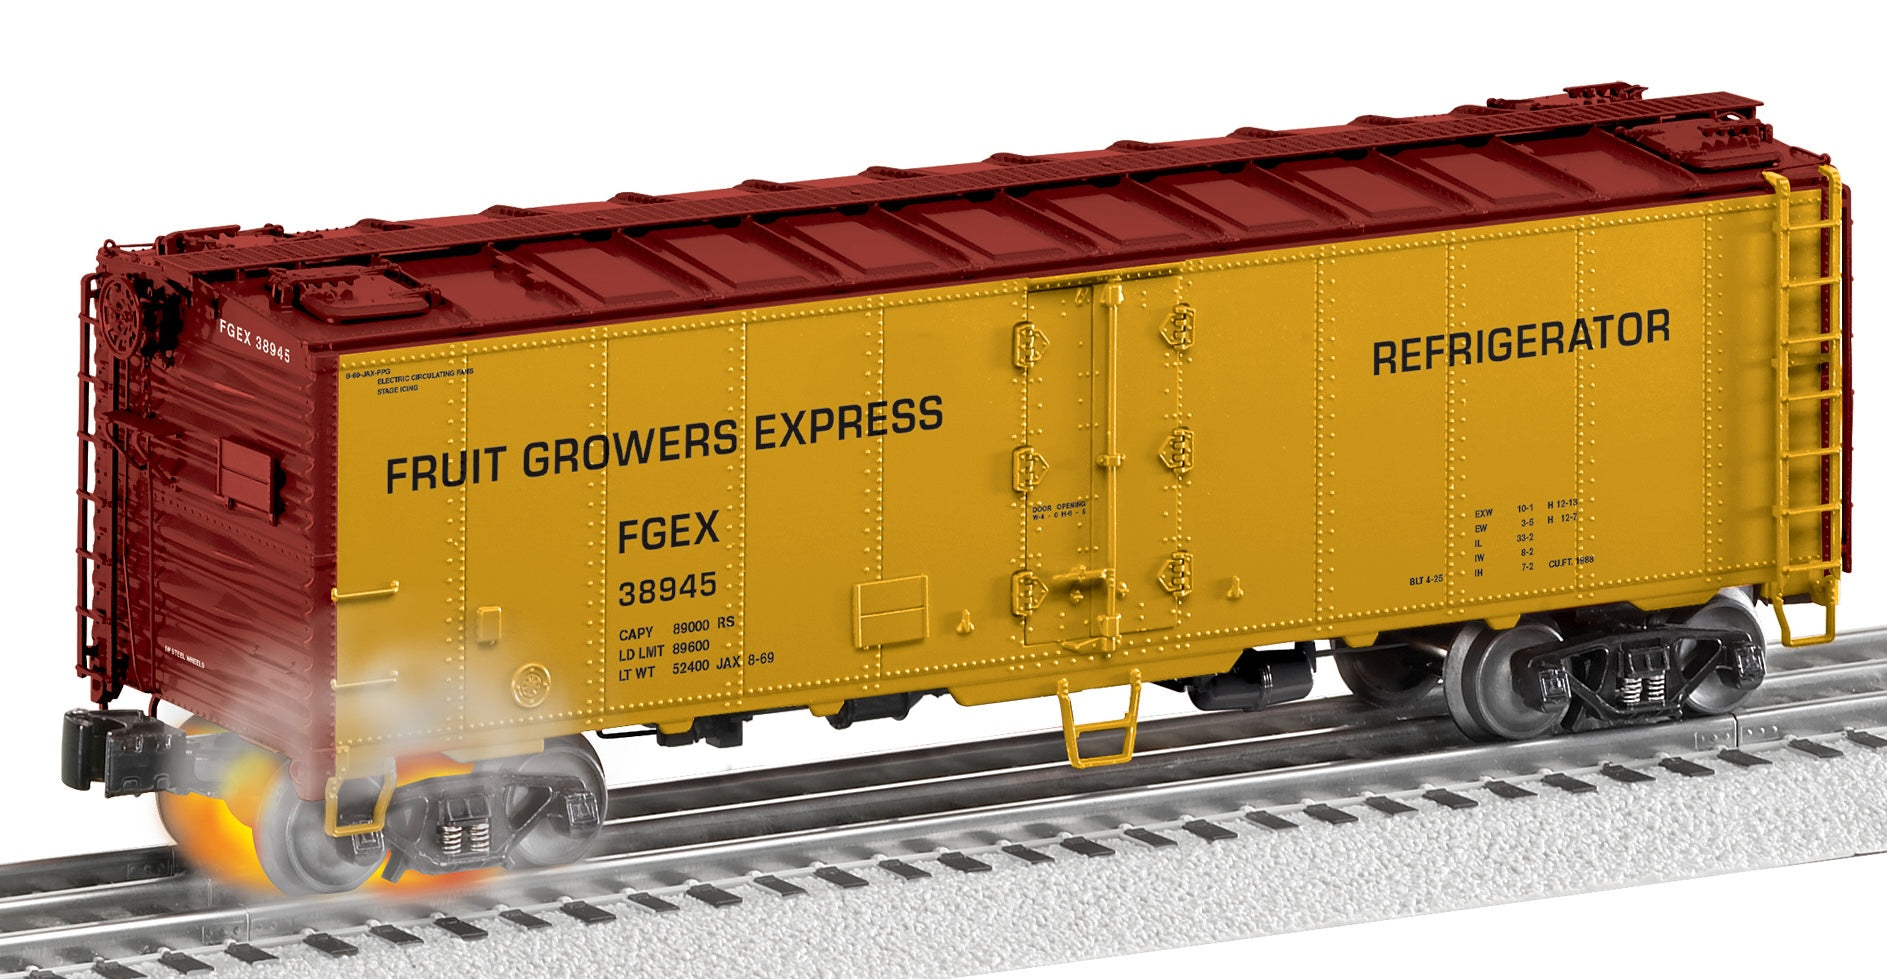 Lionel 2426330 - Hotbox Reefer Car "Fruit Growers Express" #38945